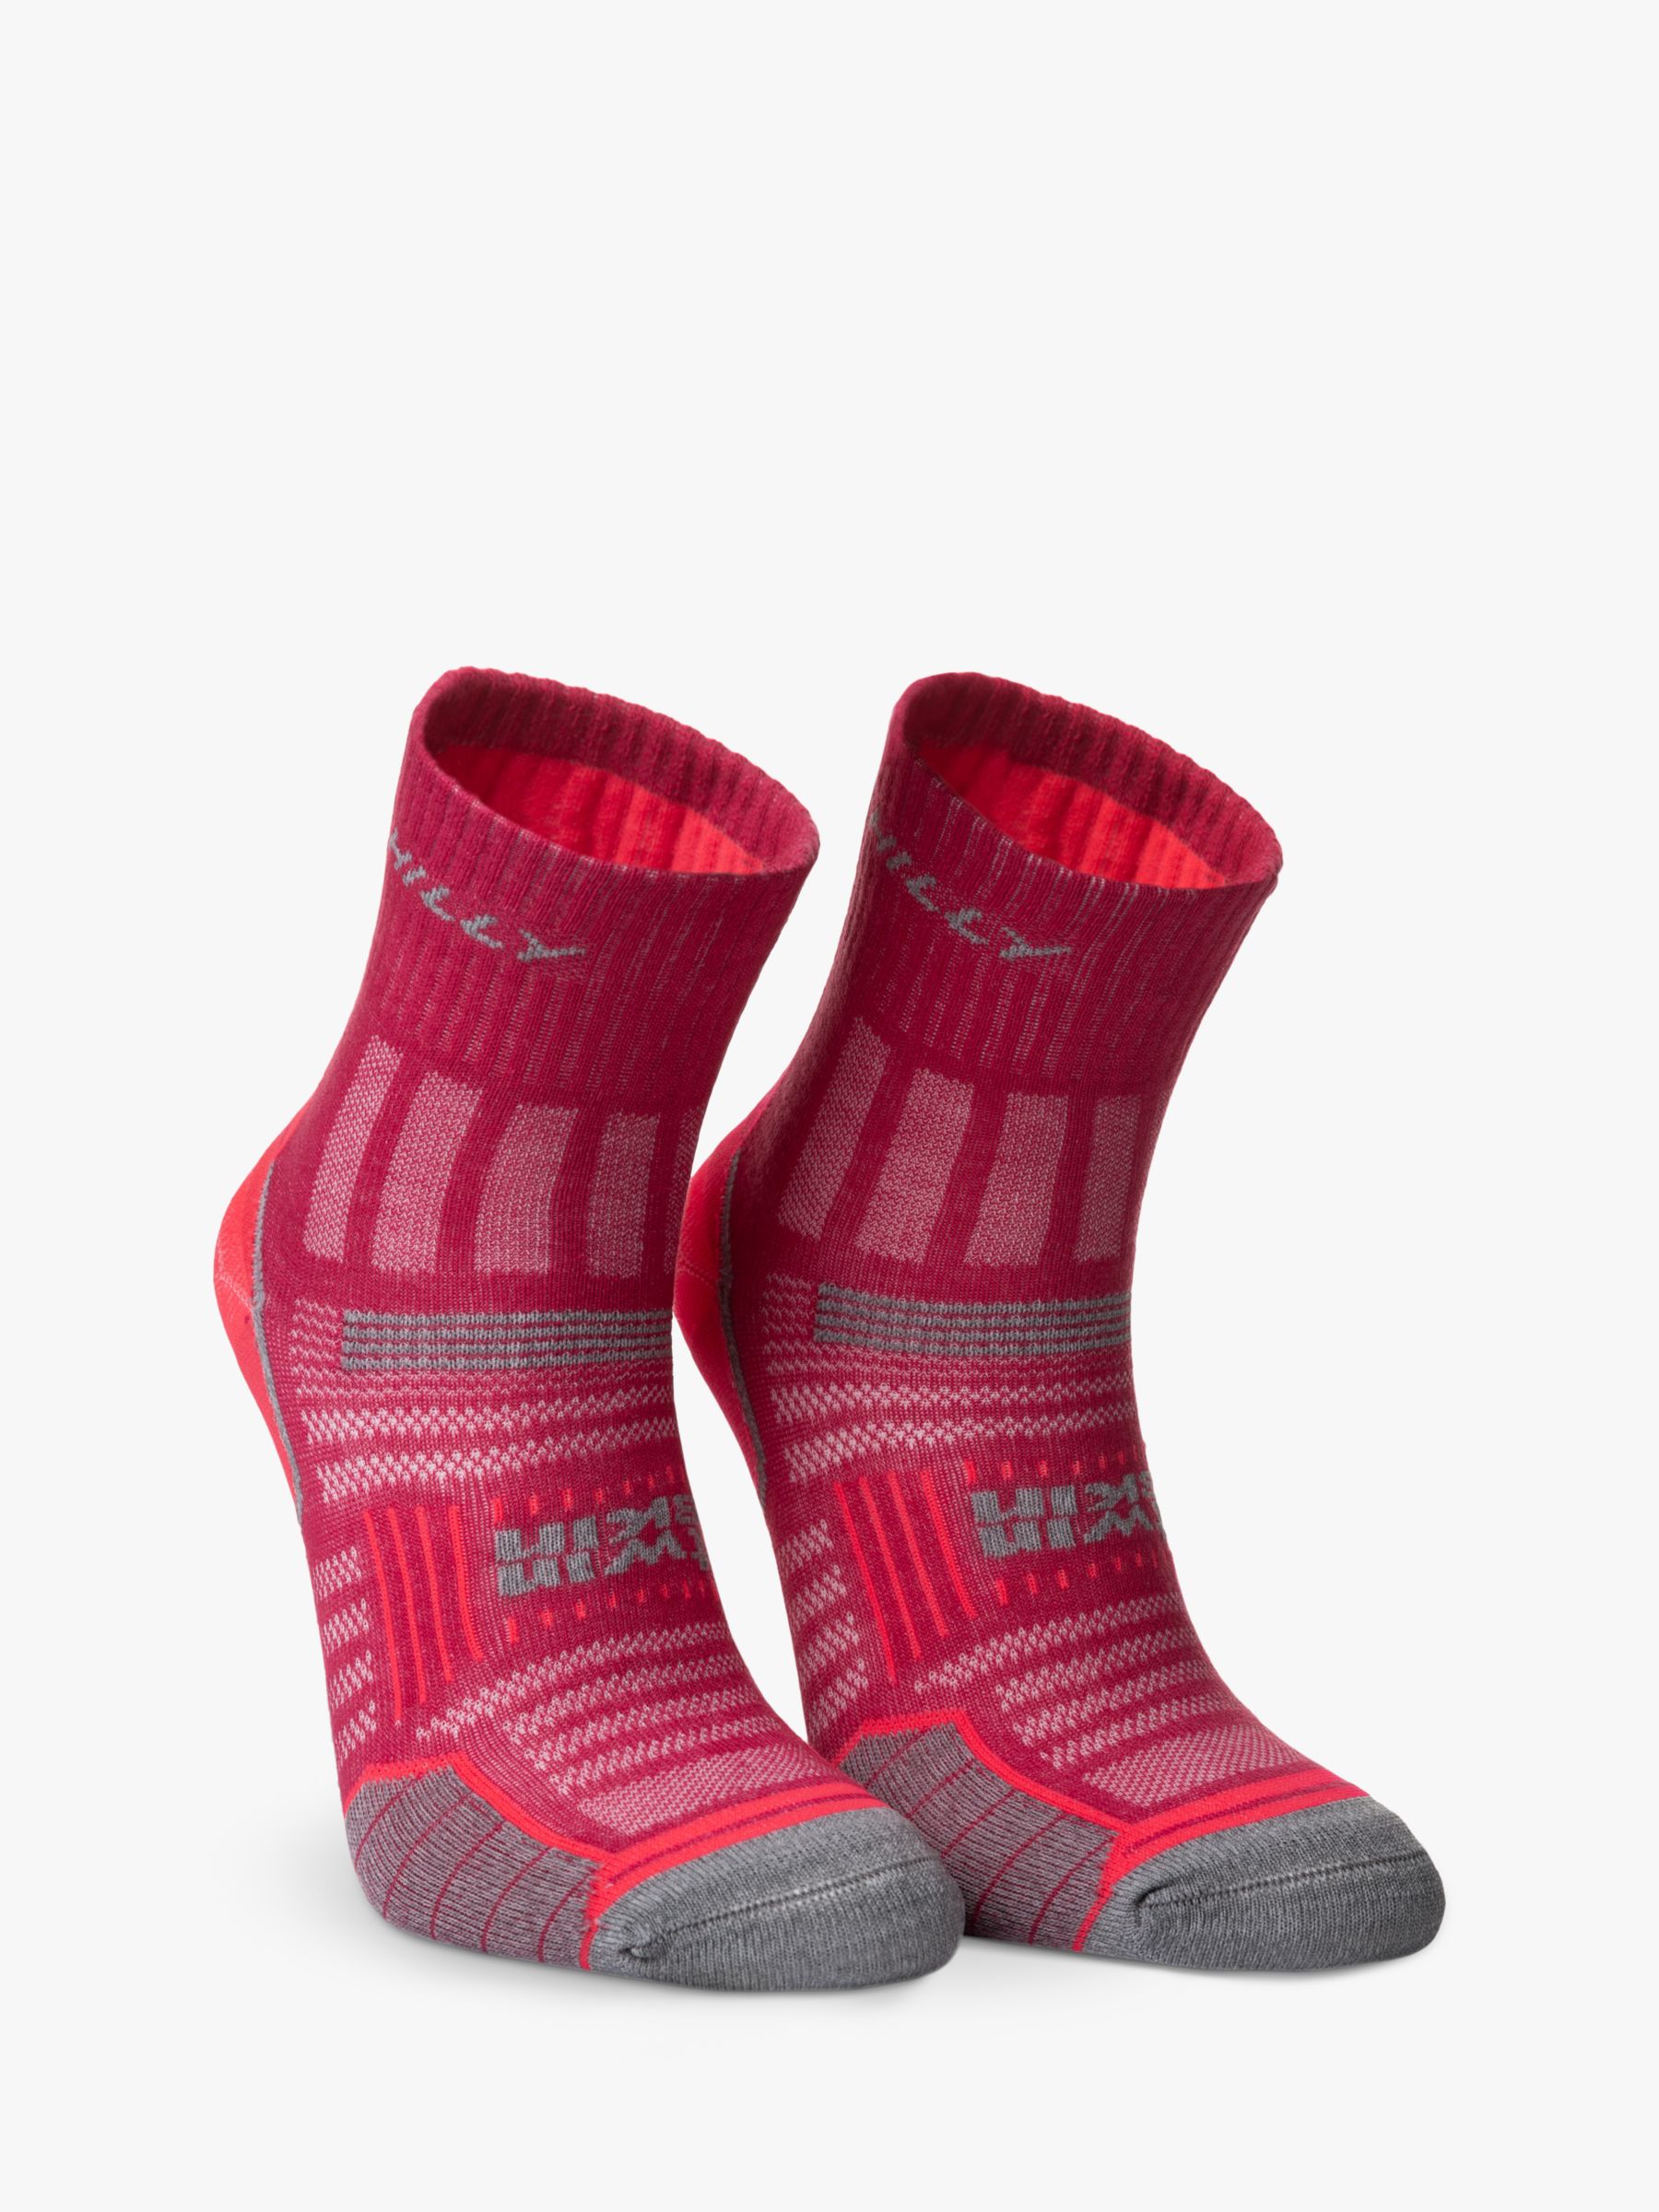 Hilly Twin Skin Ankle Running Socks